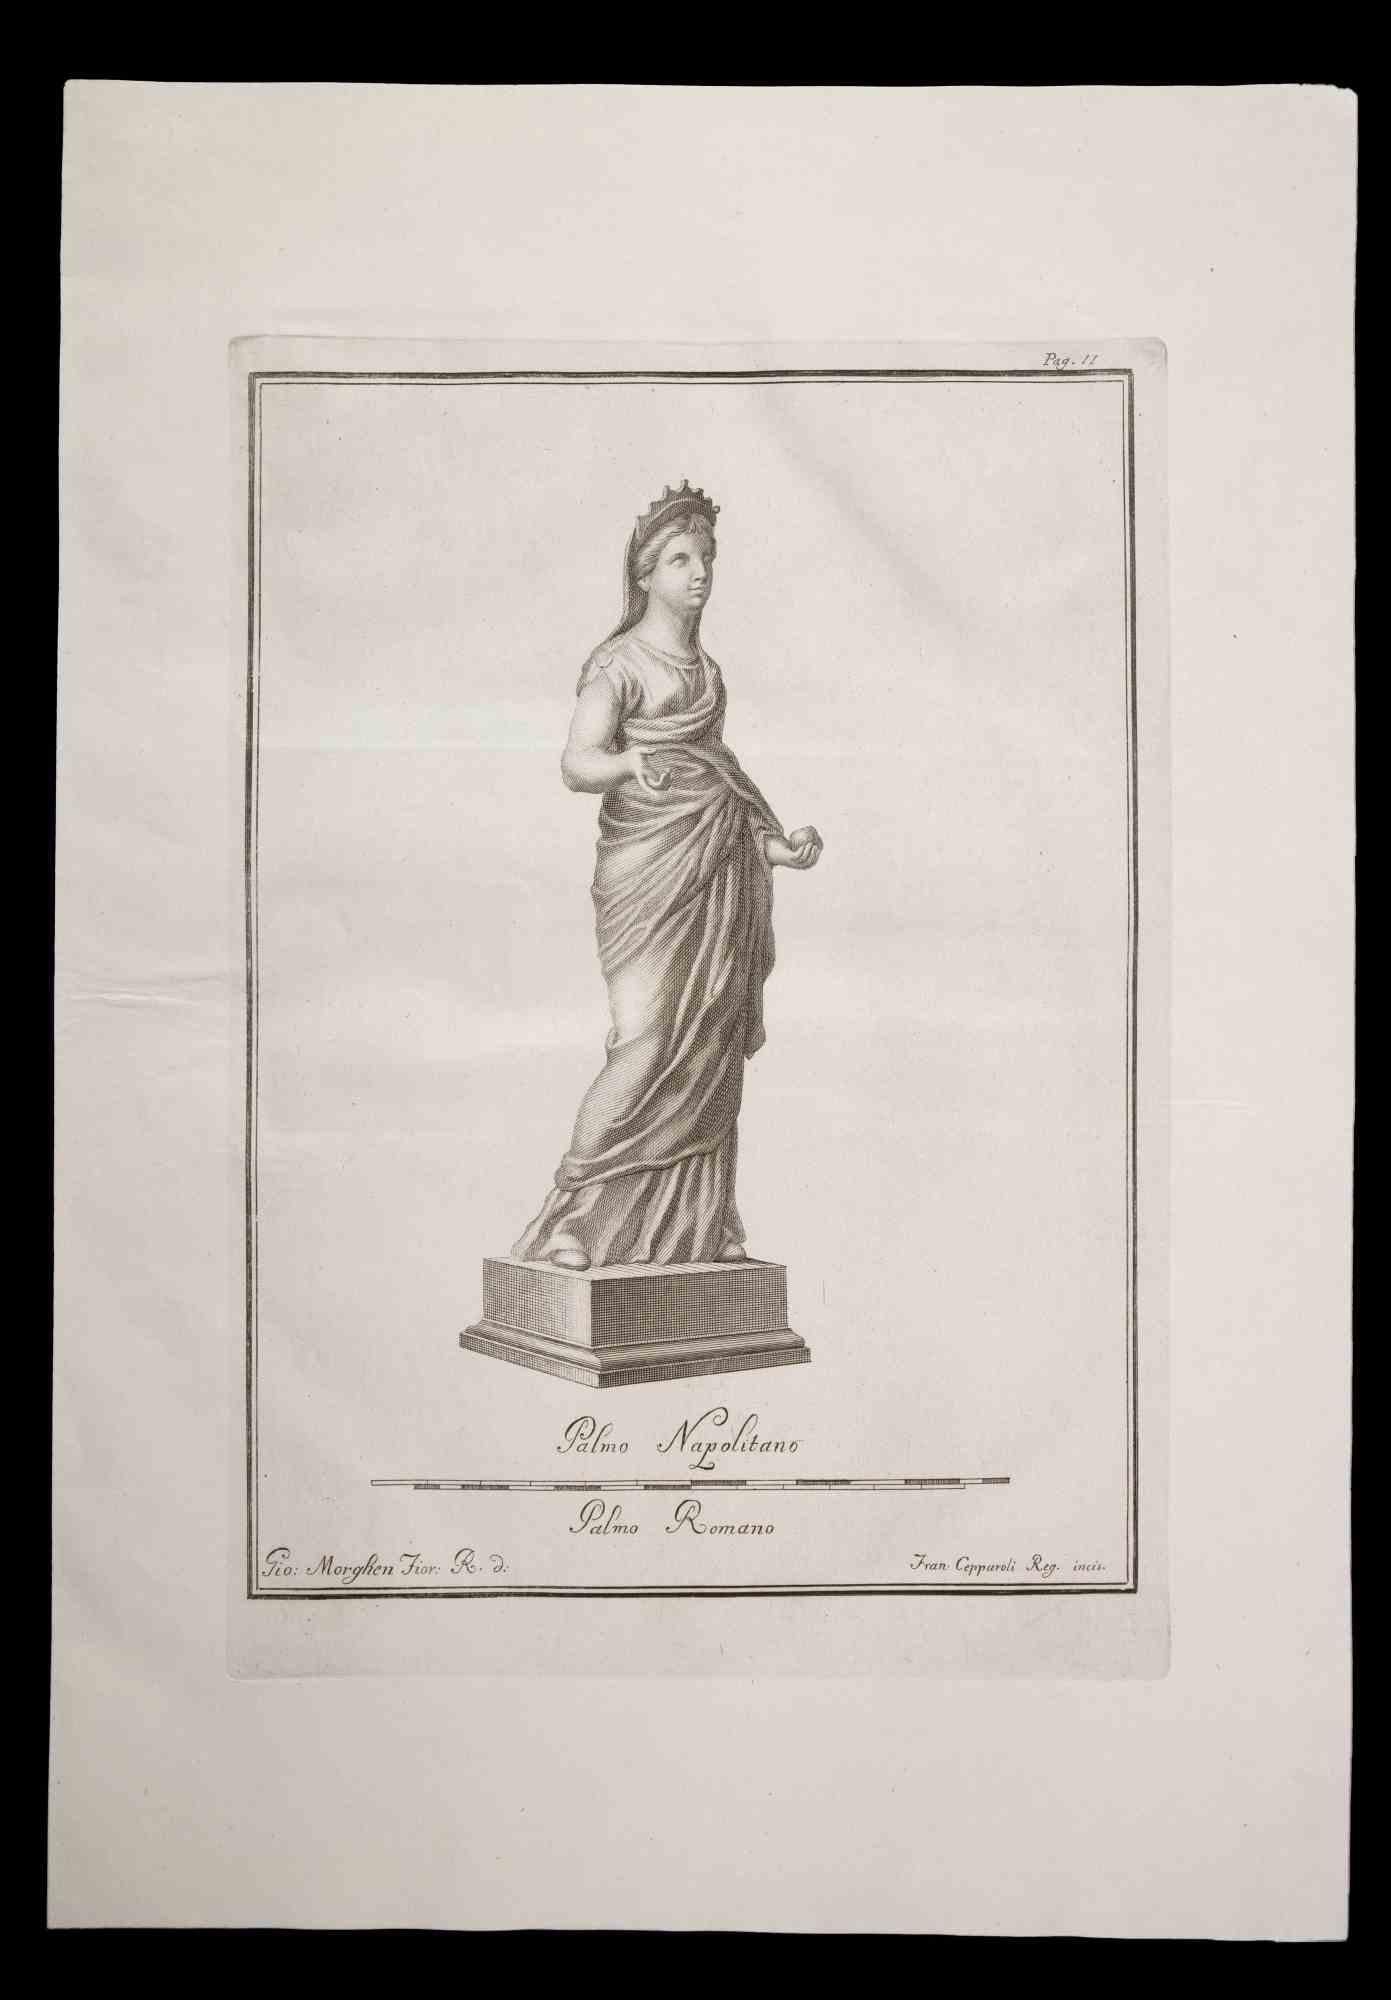 Ancient Roman Statue, from the series "Antiquities of Herculaneum", is an original etching on paper realized by Francesco Cepparoli in the 18th century.

Signed on the plate, on the lower right.

Good conditions with slight folding.

The etching